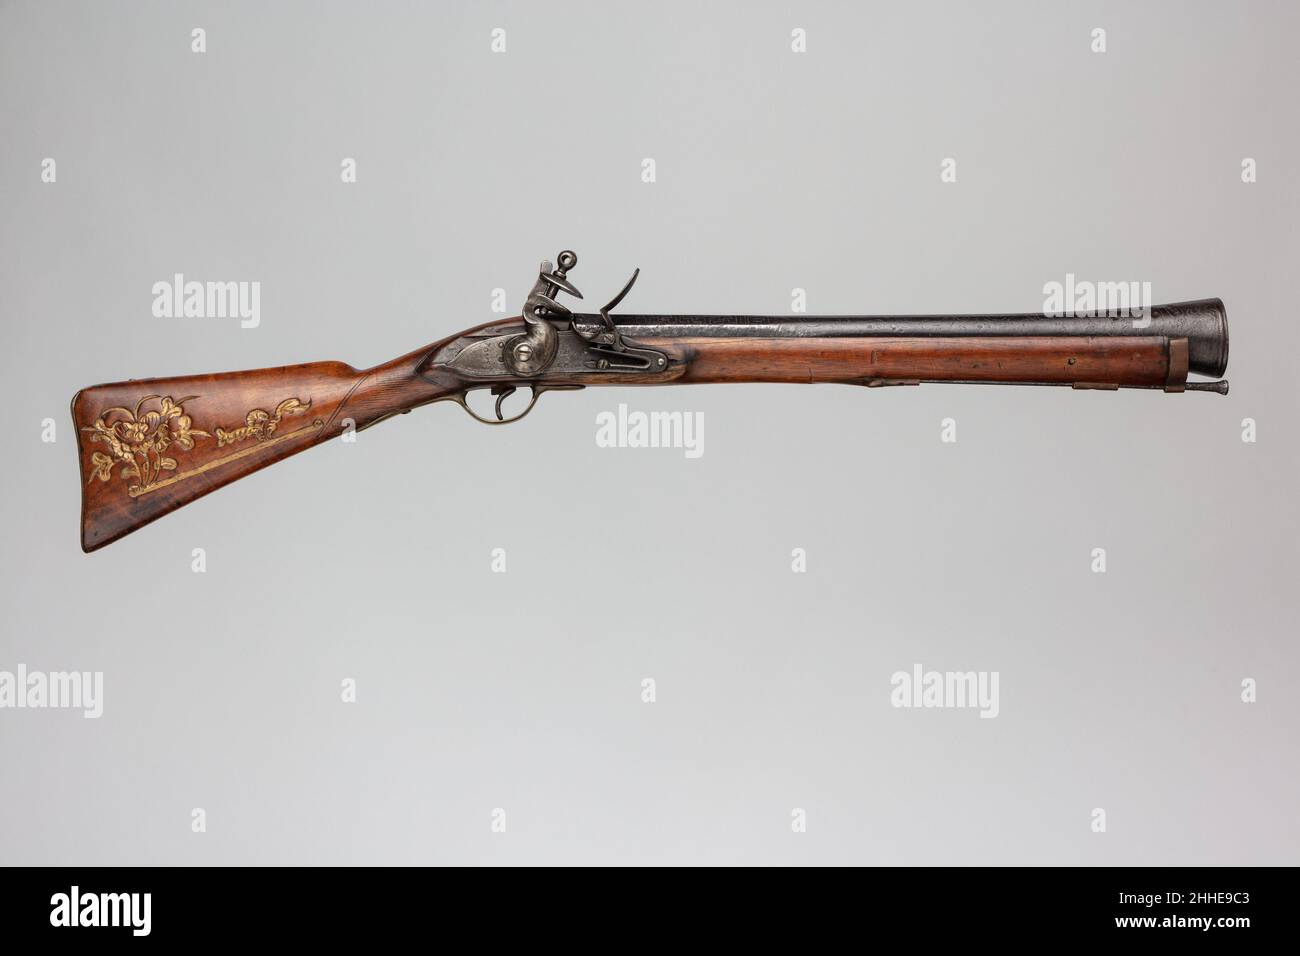 New Blunderbuss for this guy. : r/blackpowder